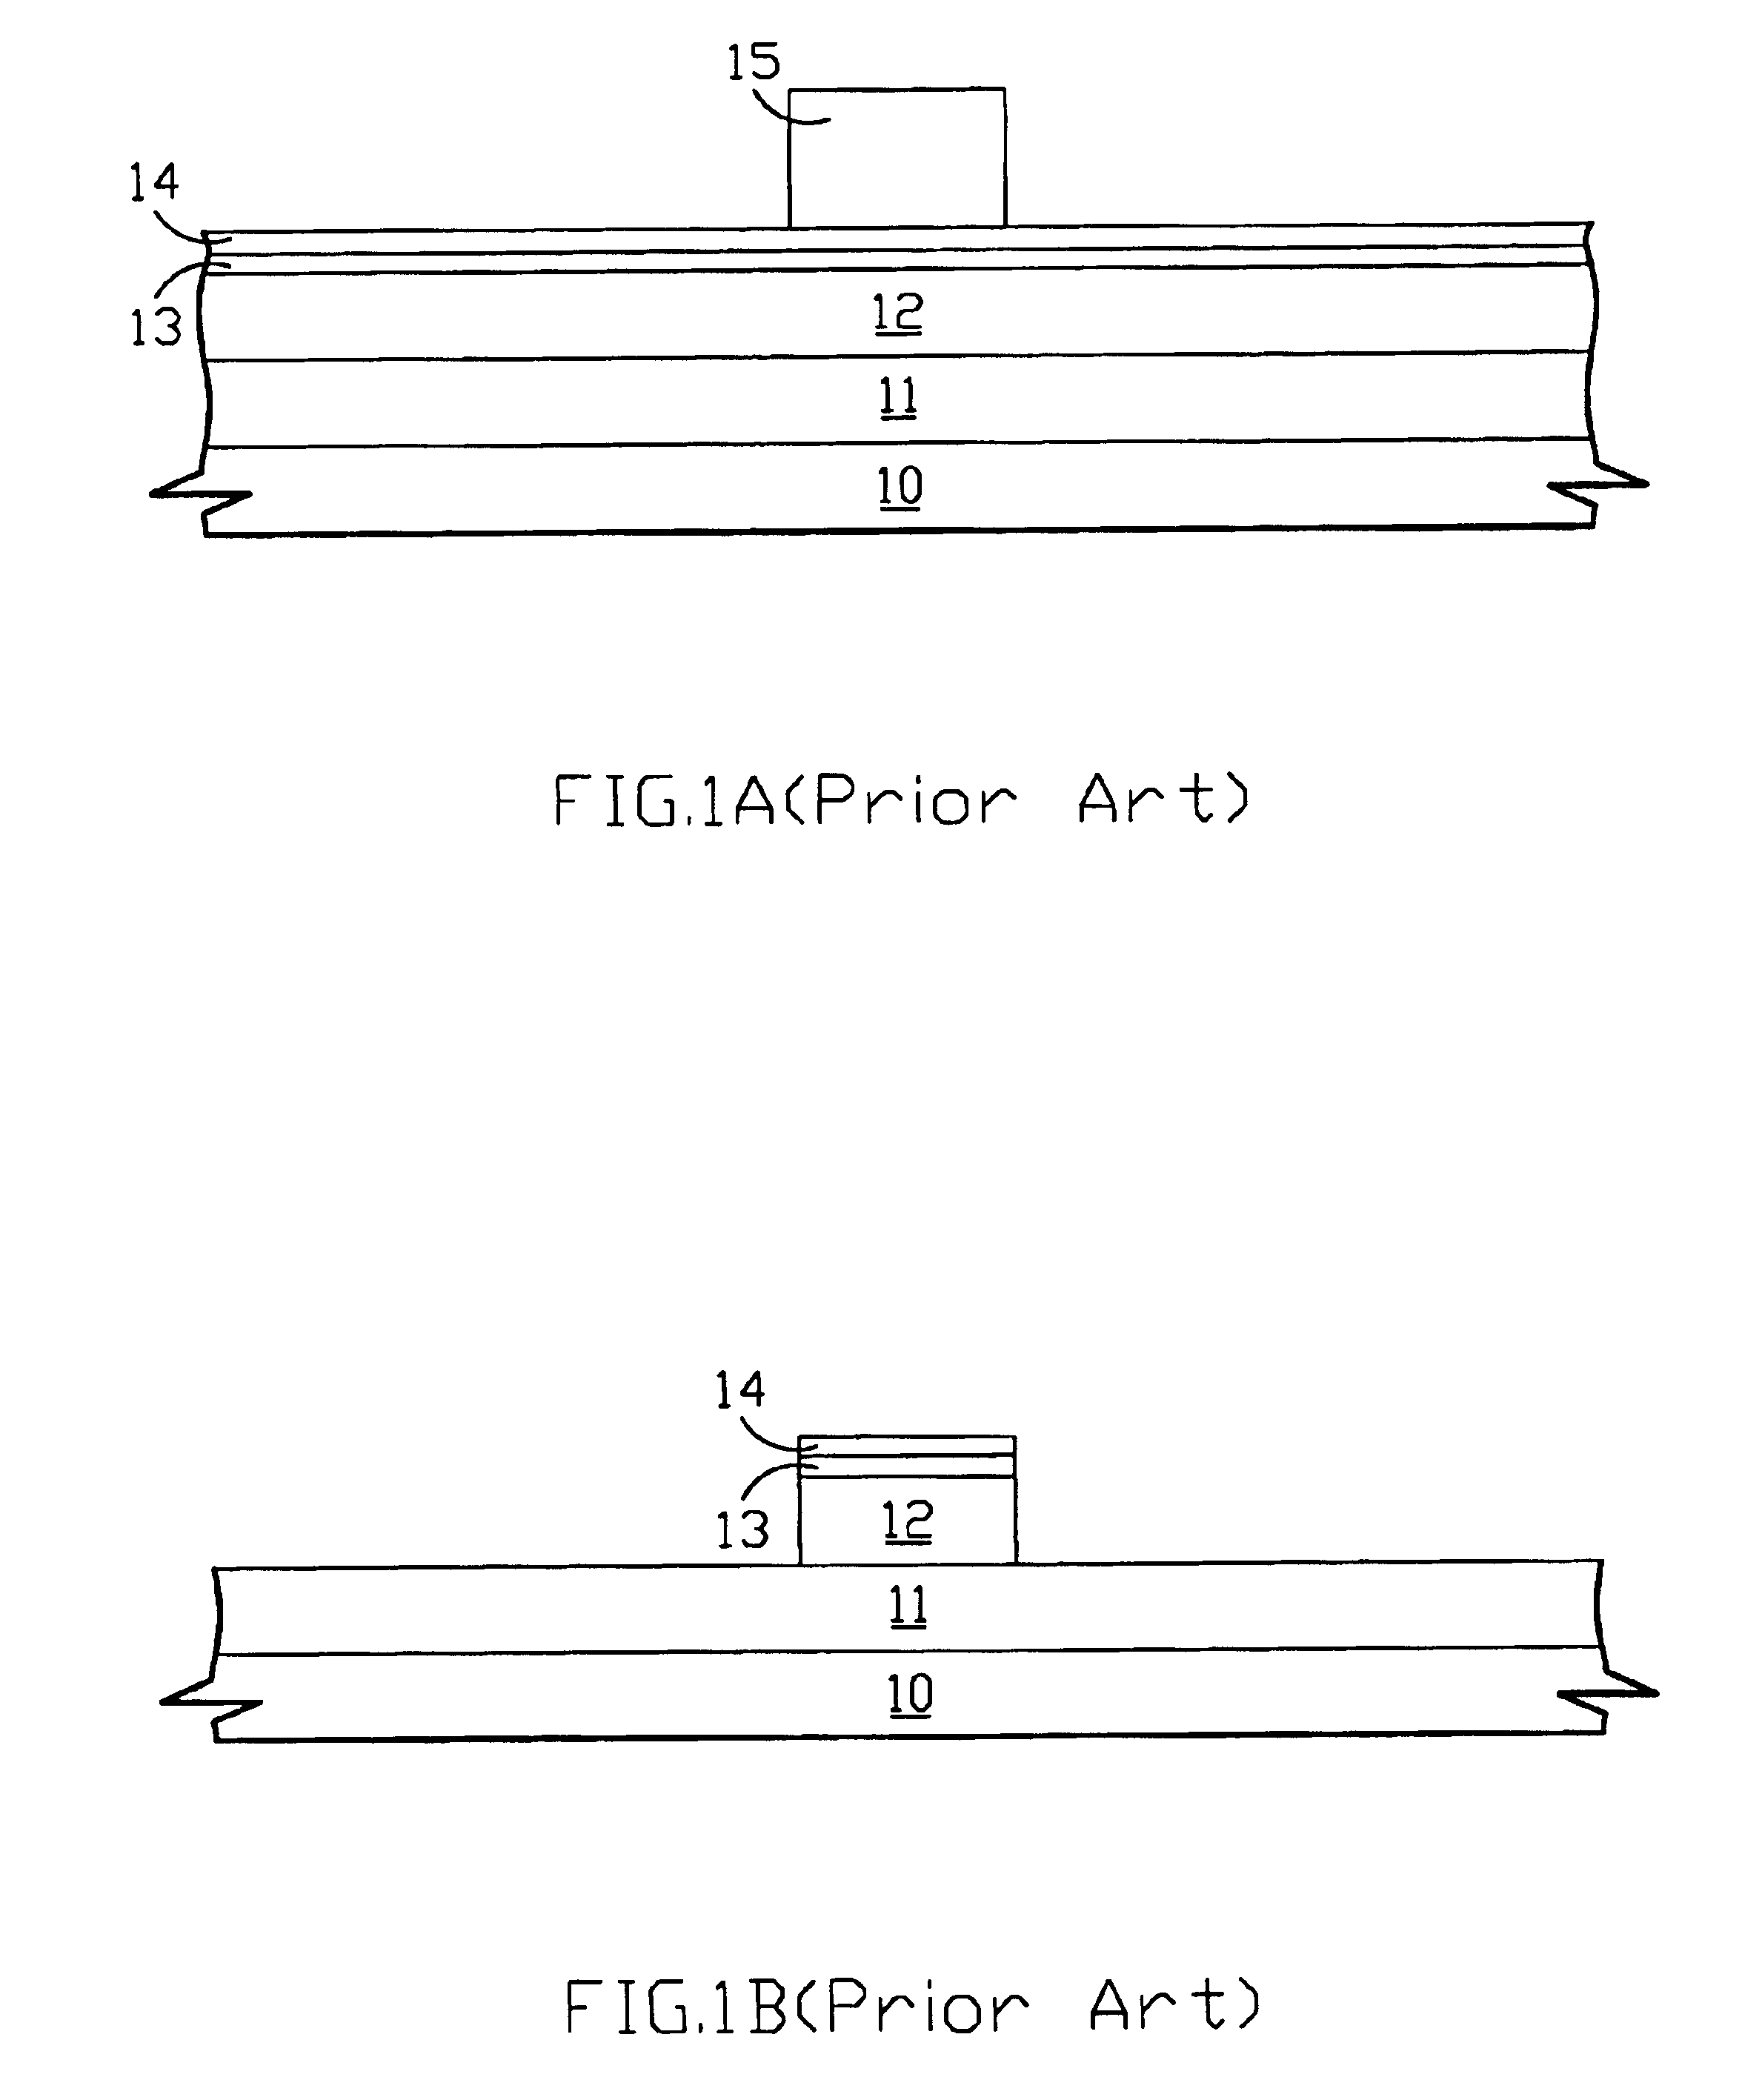 Method of fabricating a double gate MOSFET device